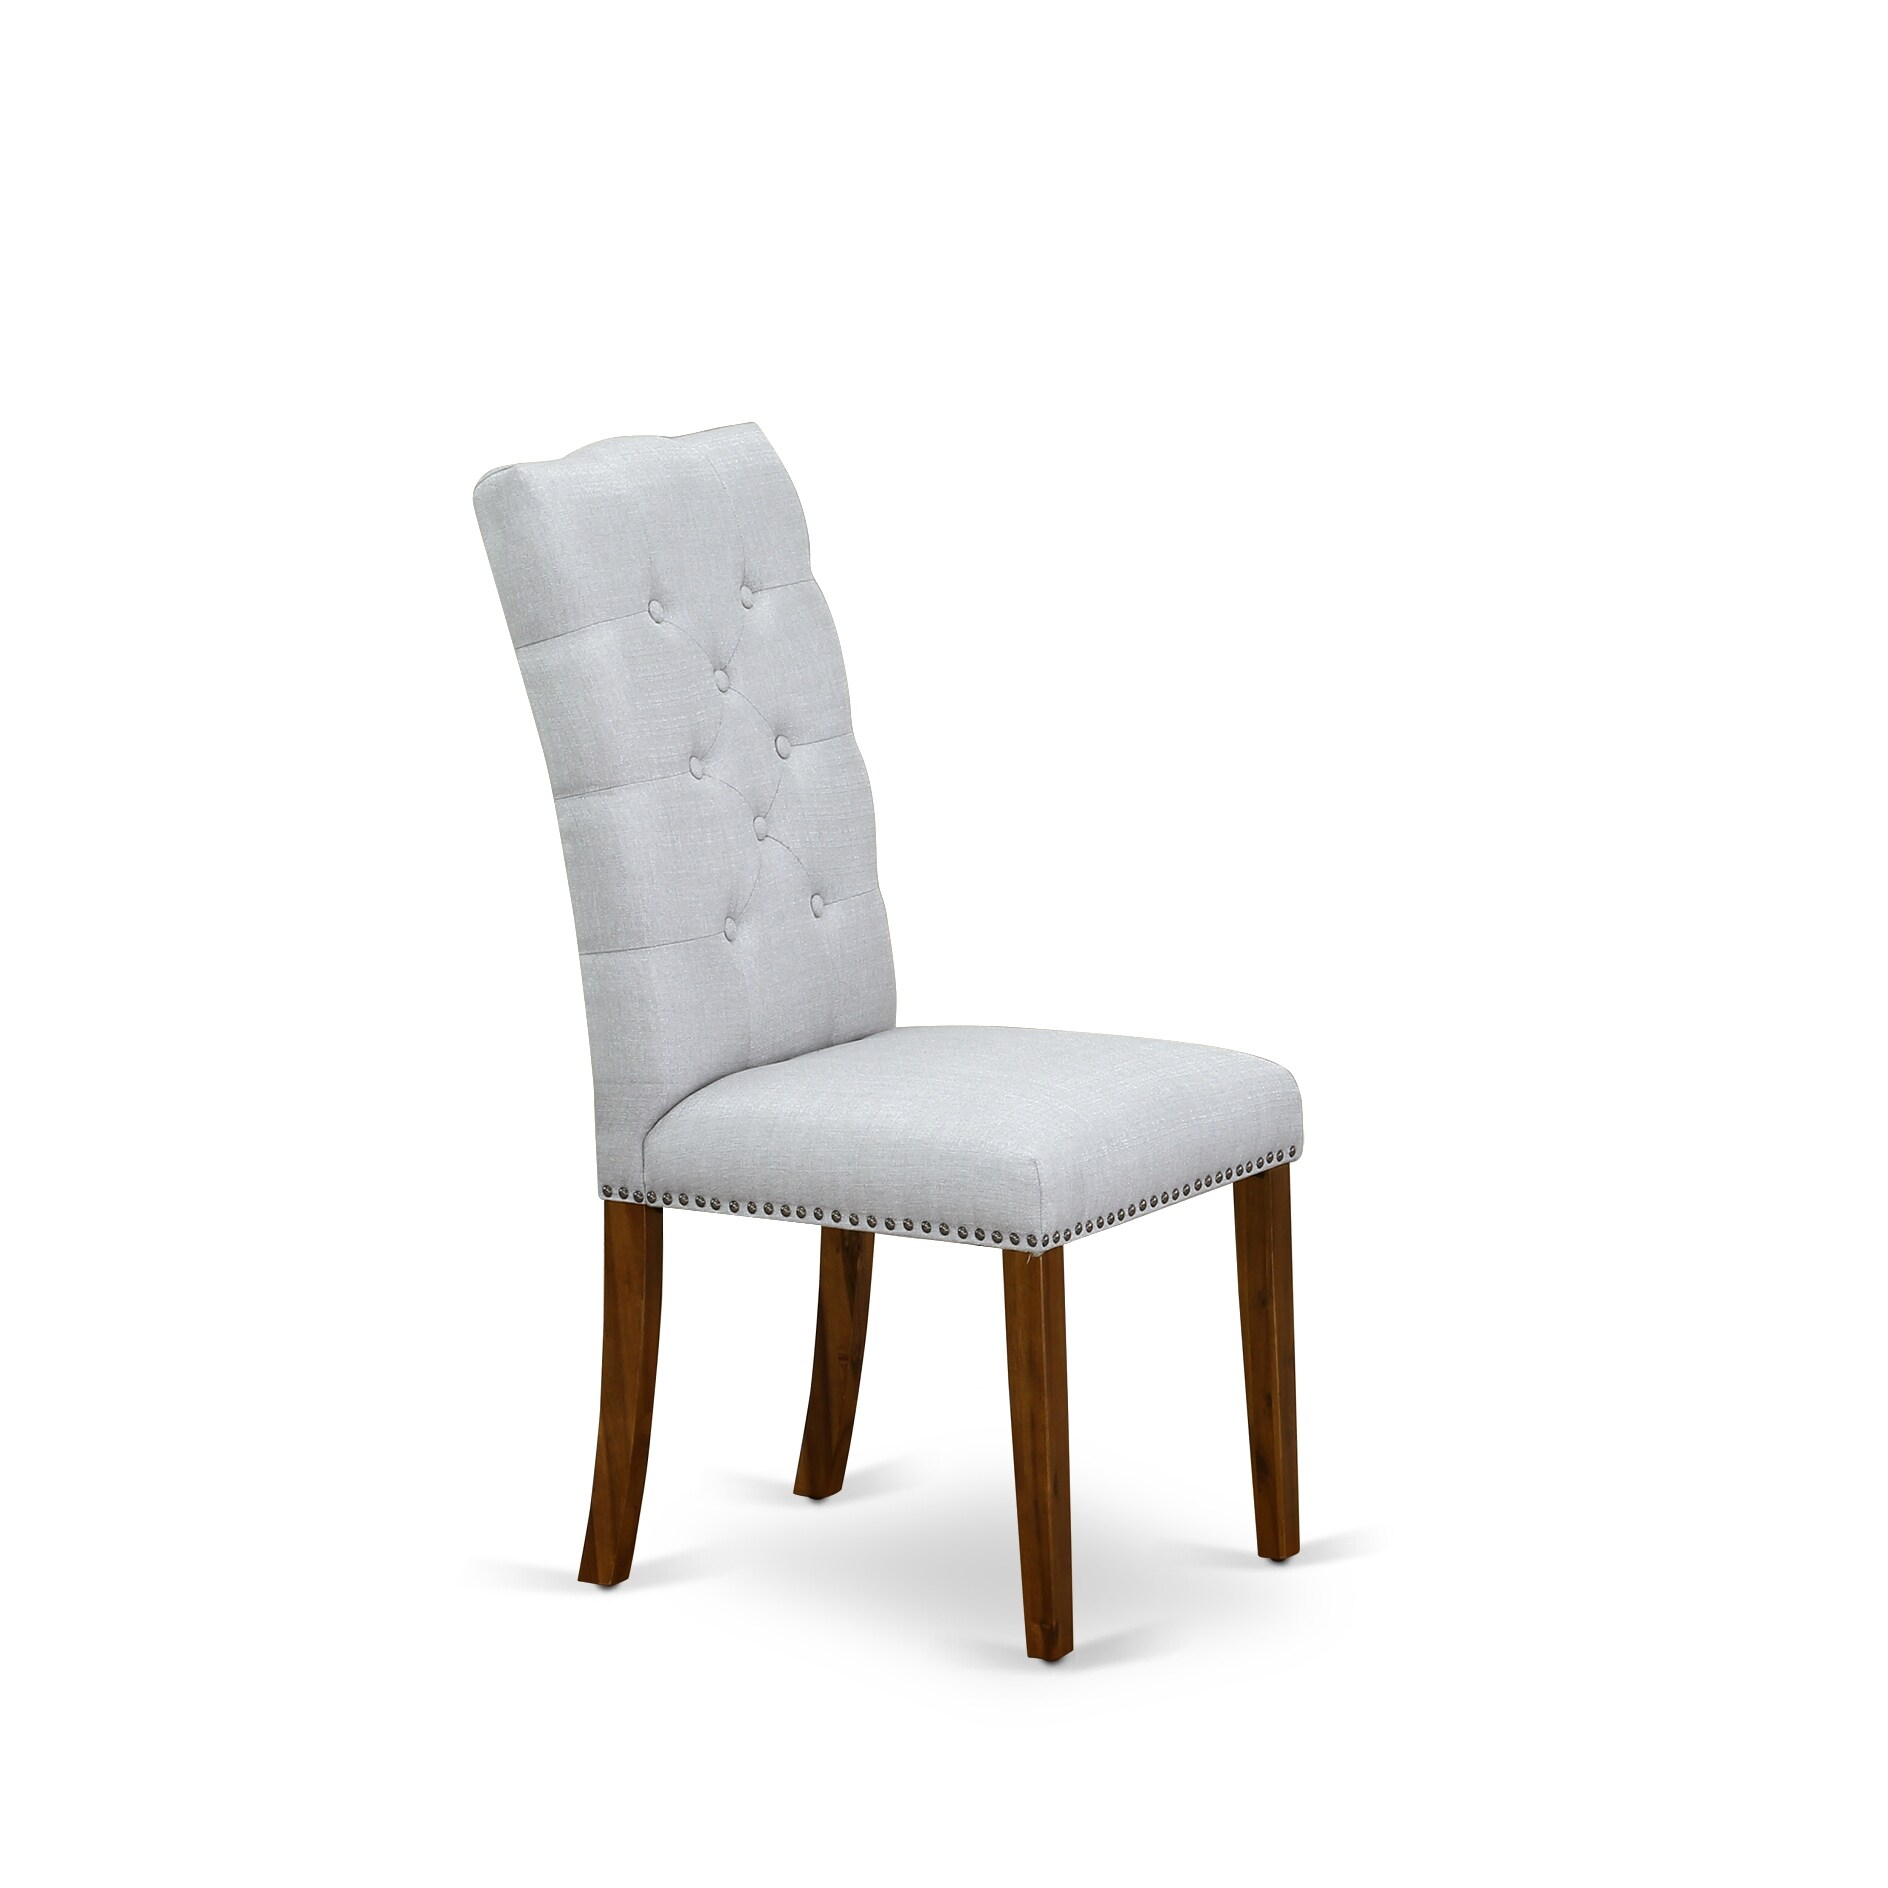 Price for 2 Chairs GROVE Oak Effect & Brown Dining Chairs W43 x D49.5 x H90cm 